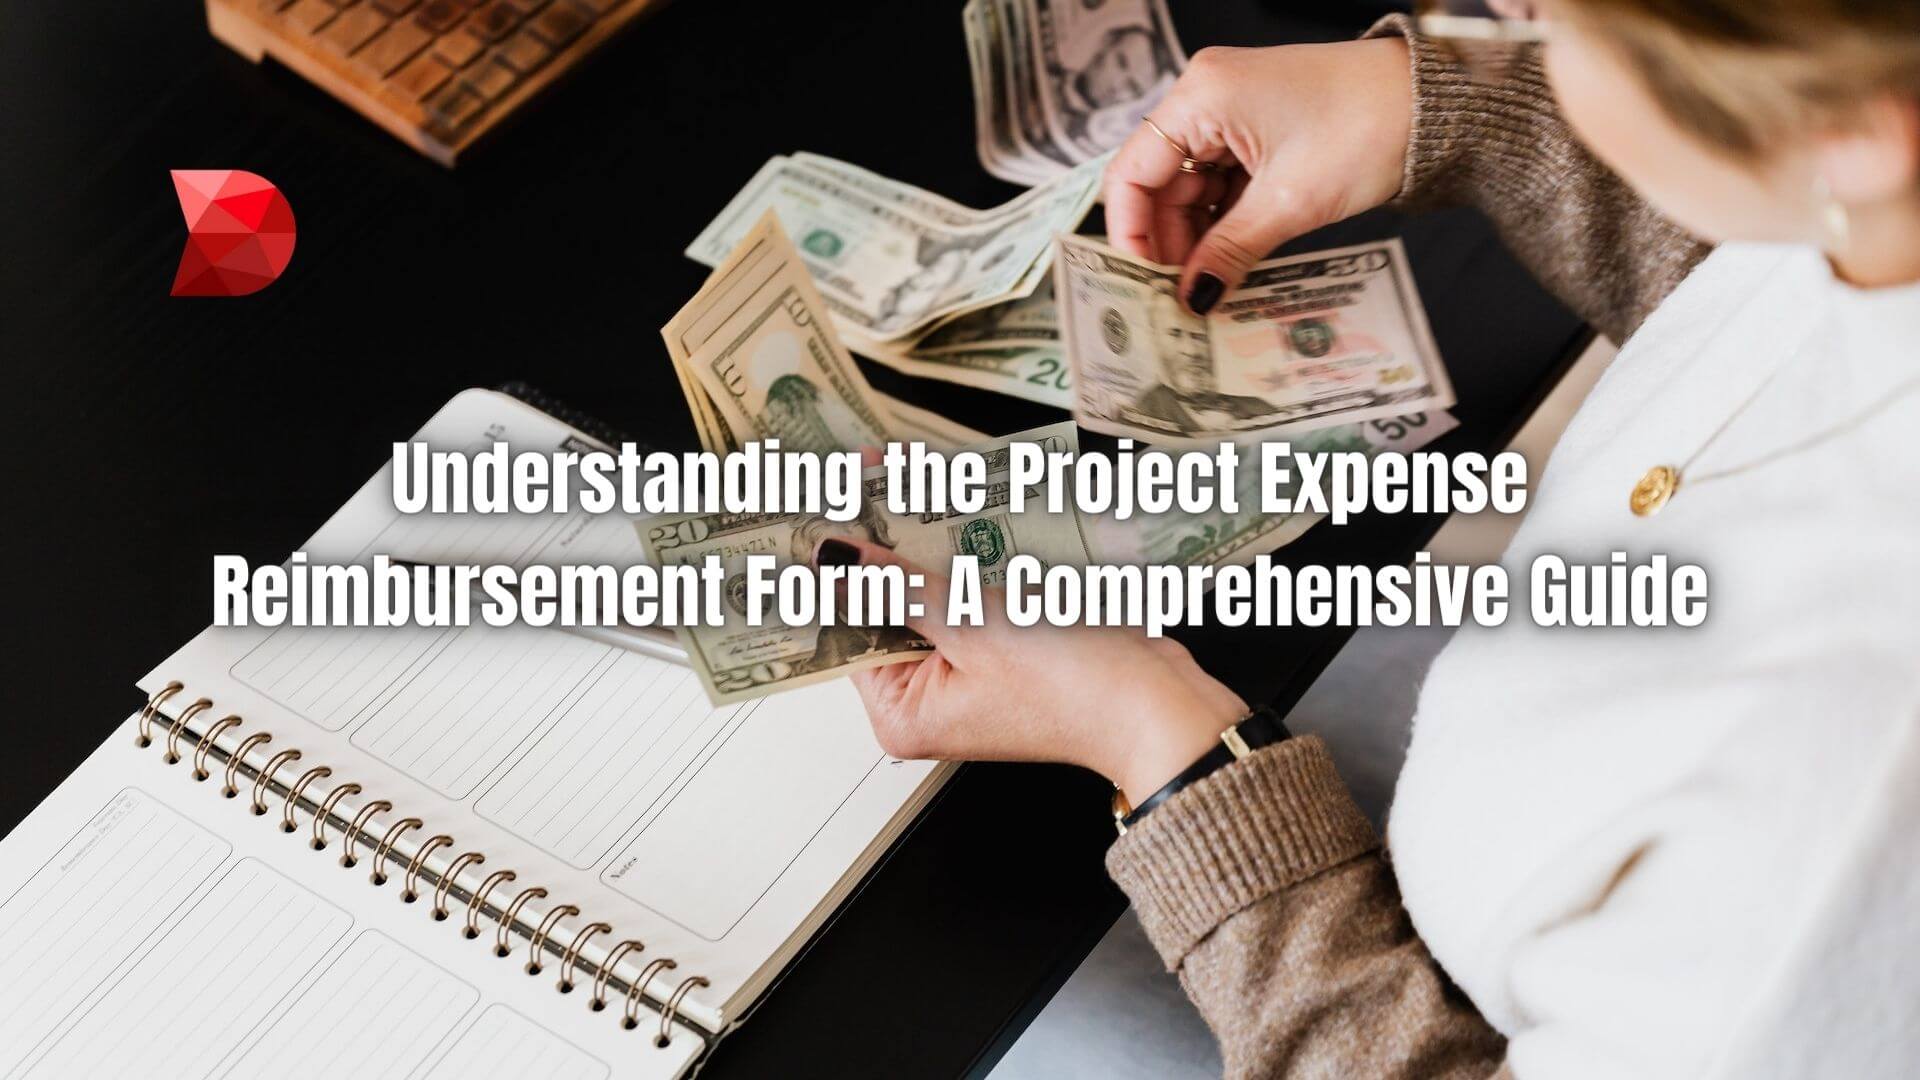 The effective use of a Project Expense Reimbursement Form is essential to managing project finances. Here's what it is and how to make one!